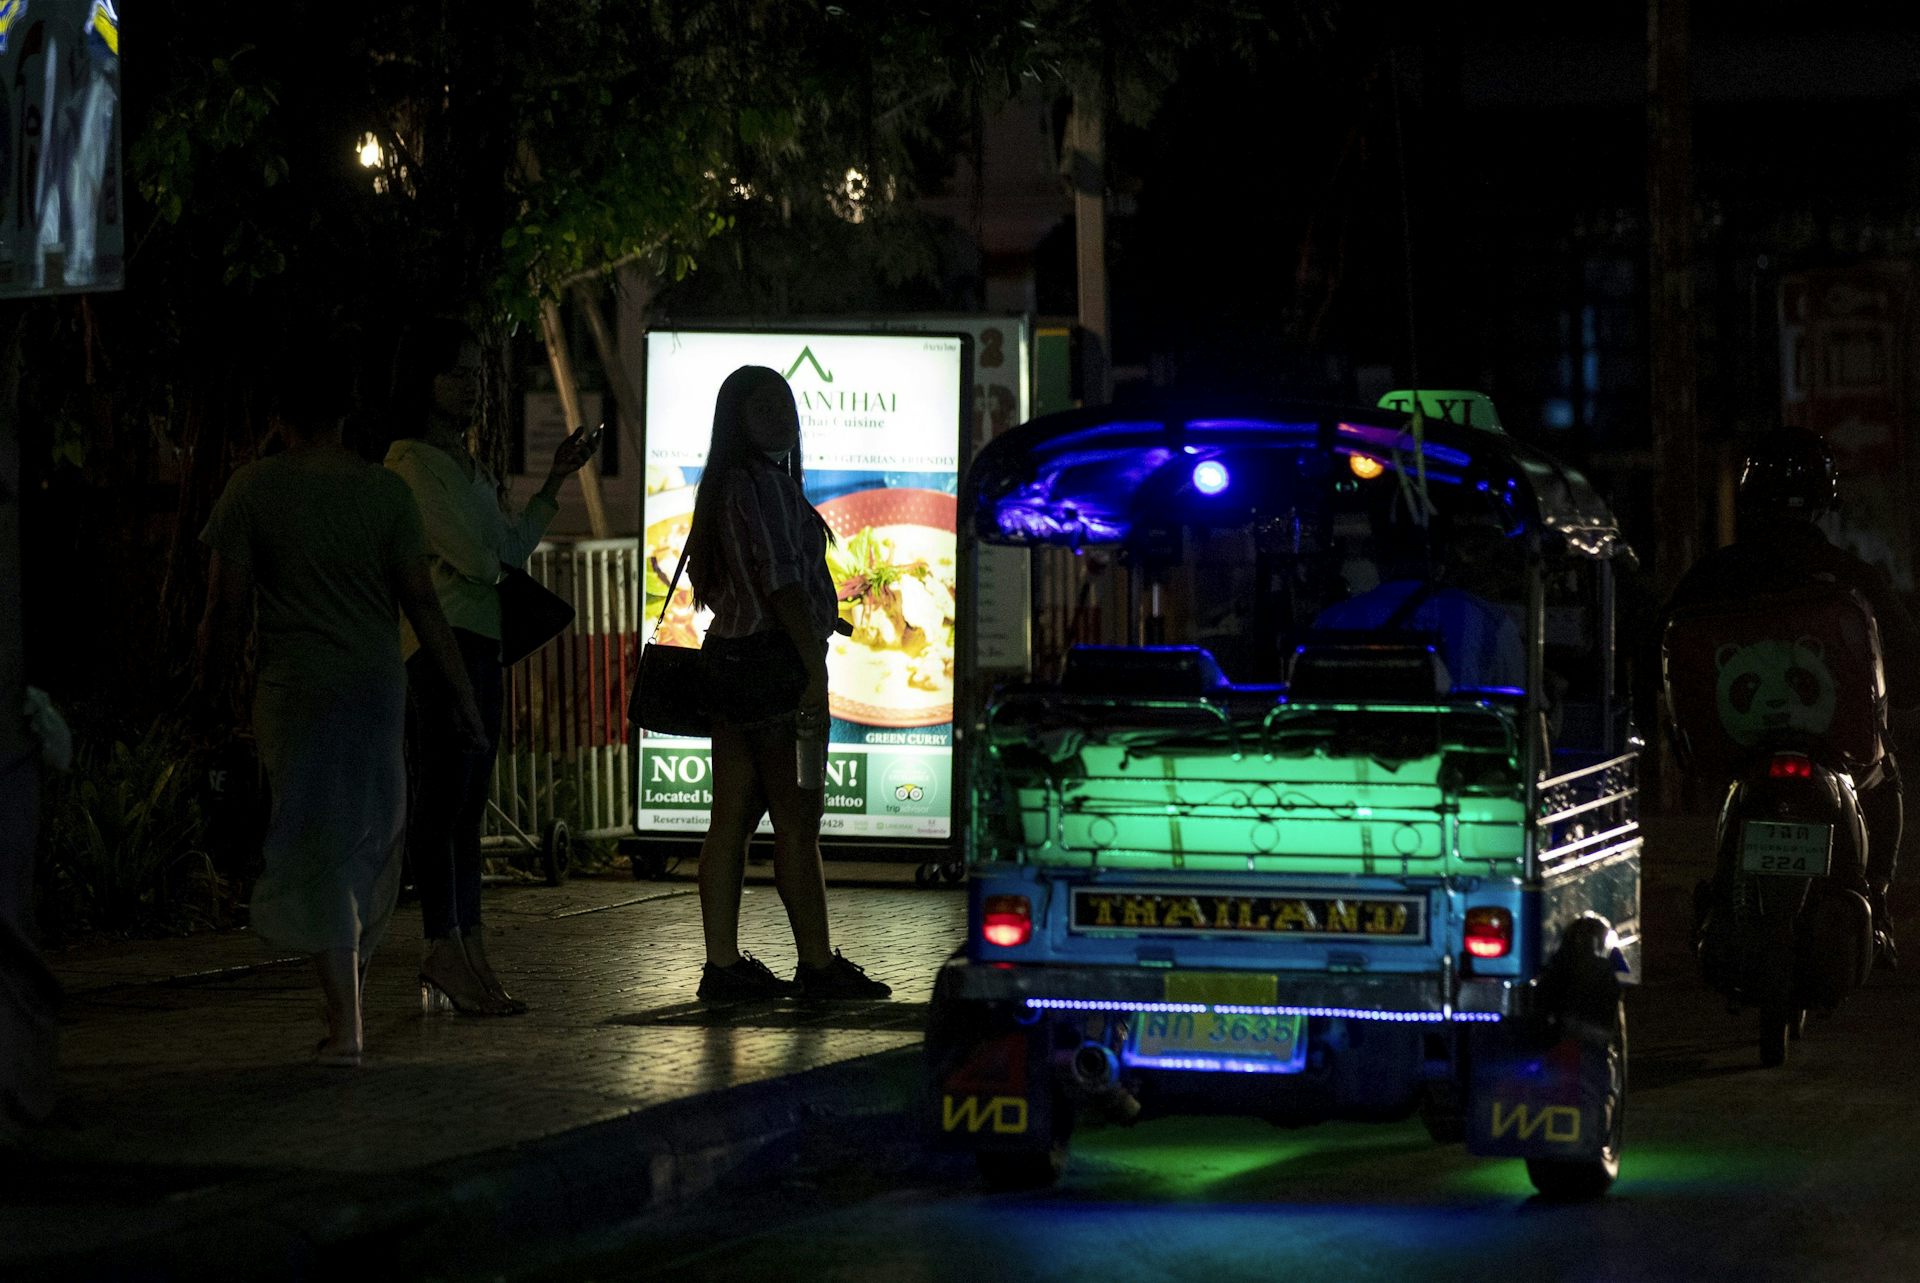 A woman stands backlit next to a dimly lit bus that reads 'Thailand' with green lighting.